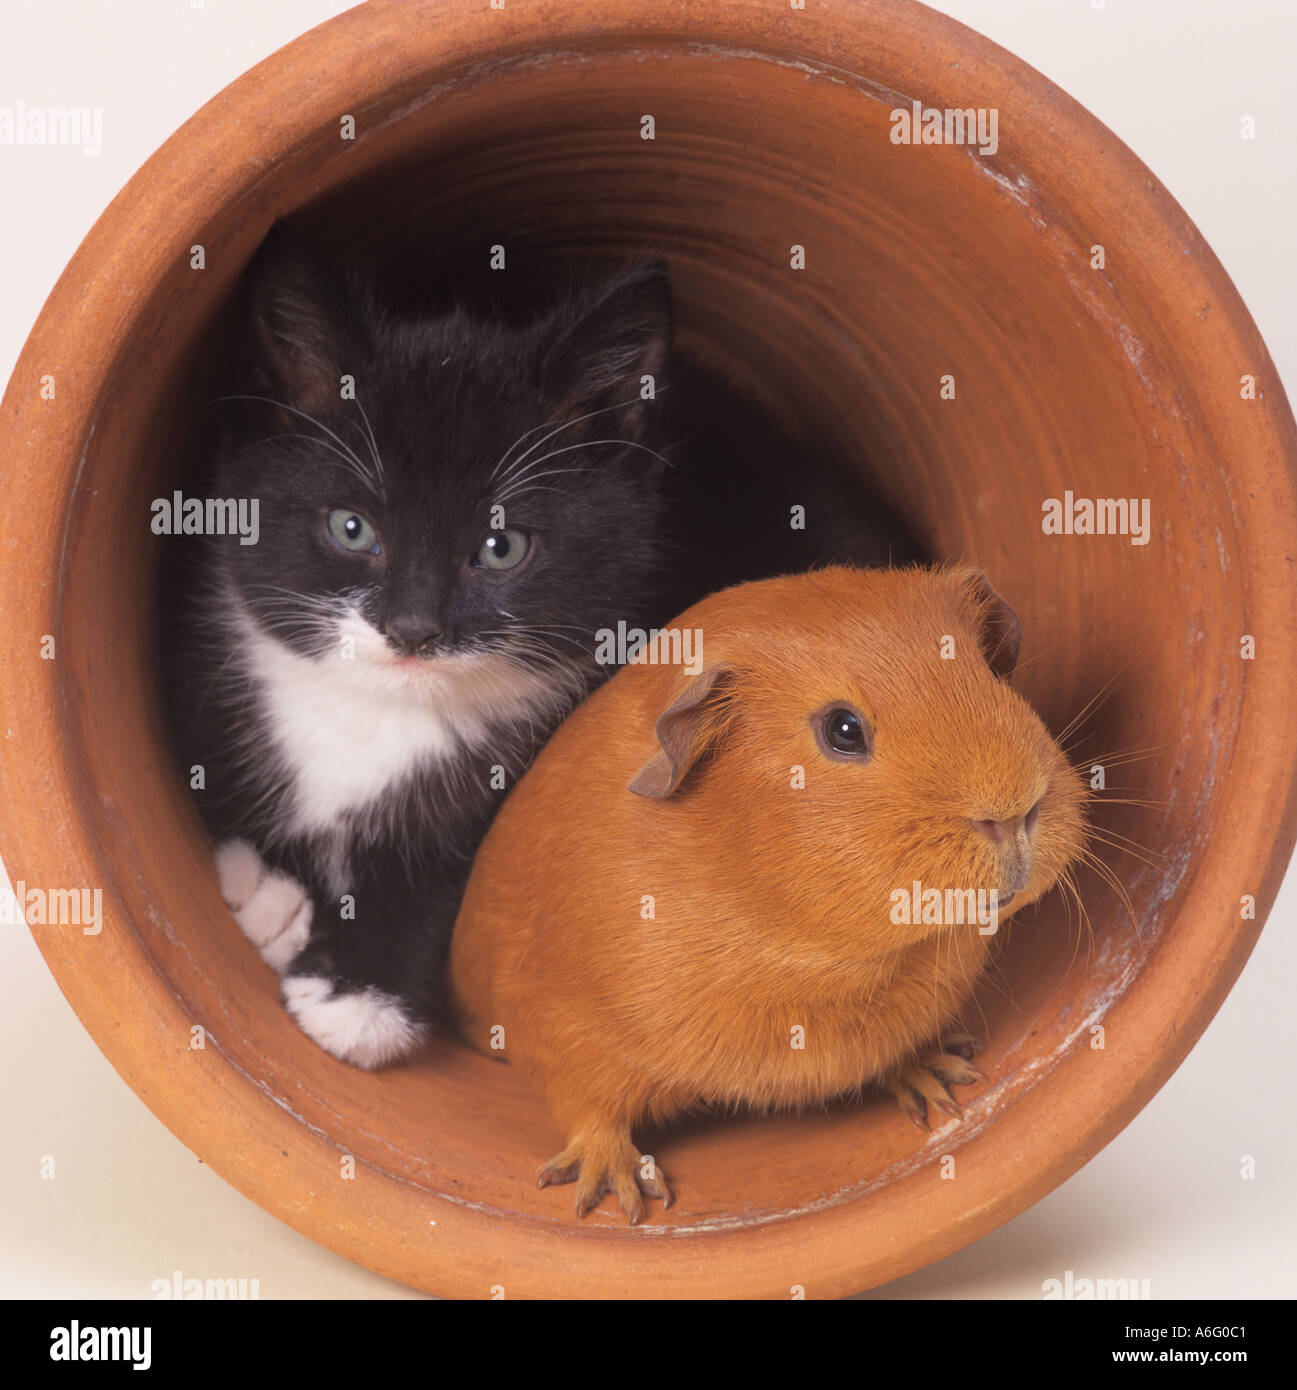 A single Pet Guinea Pig in flower pot with black and white kitten Stock Photo